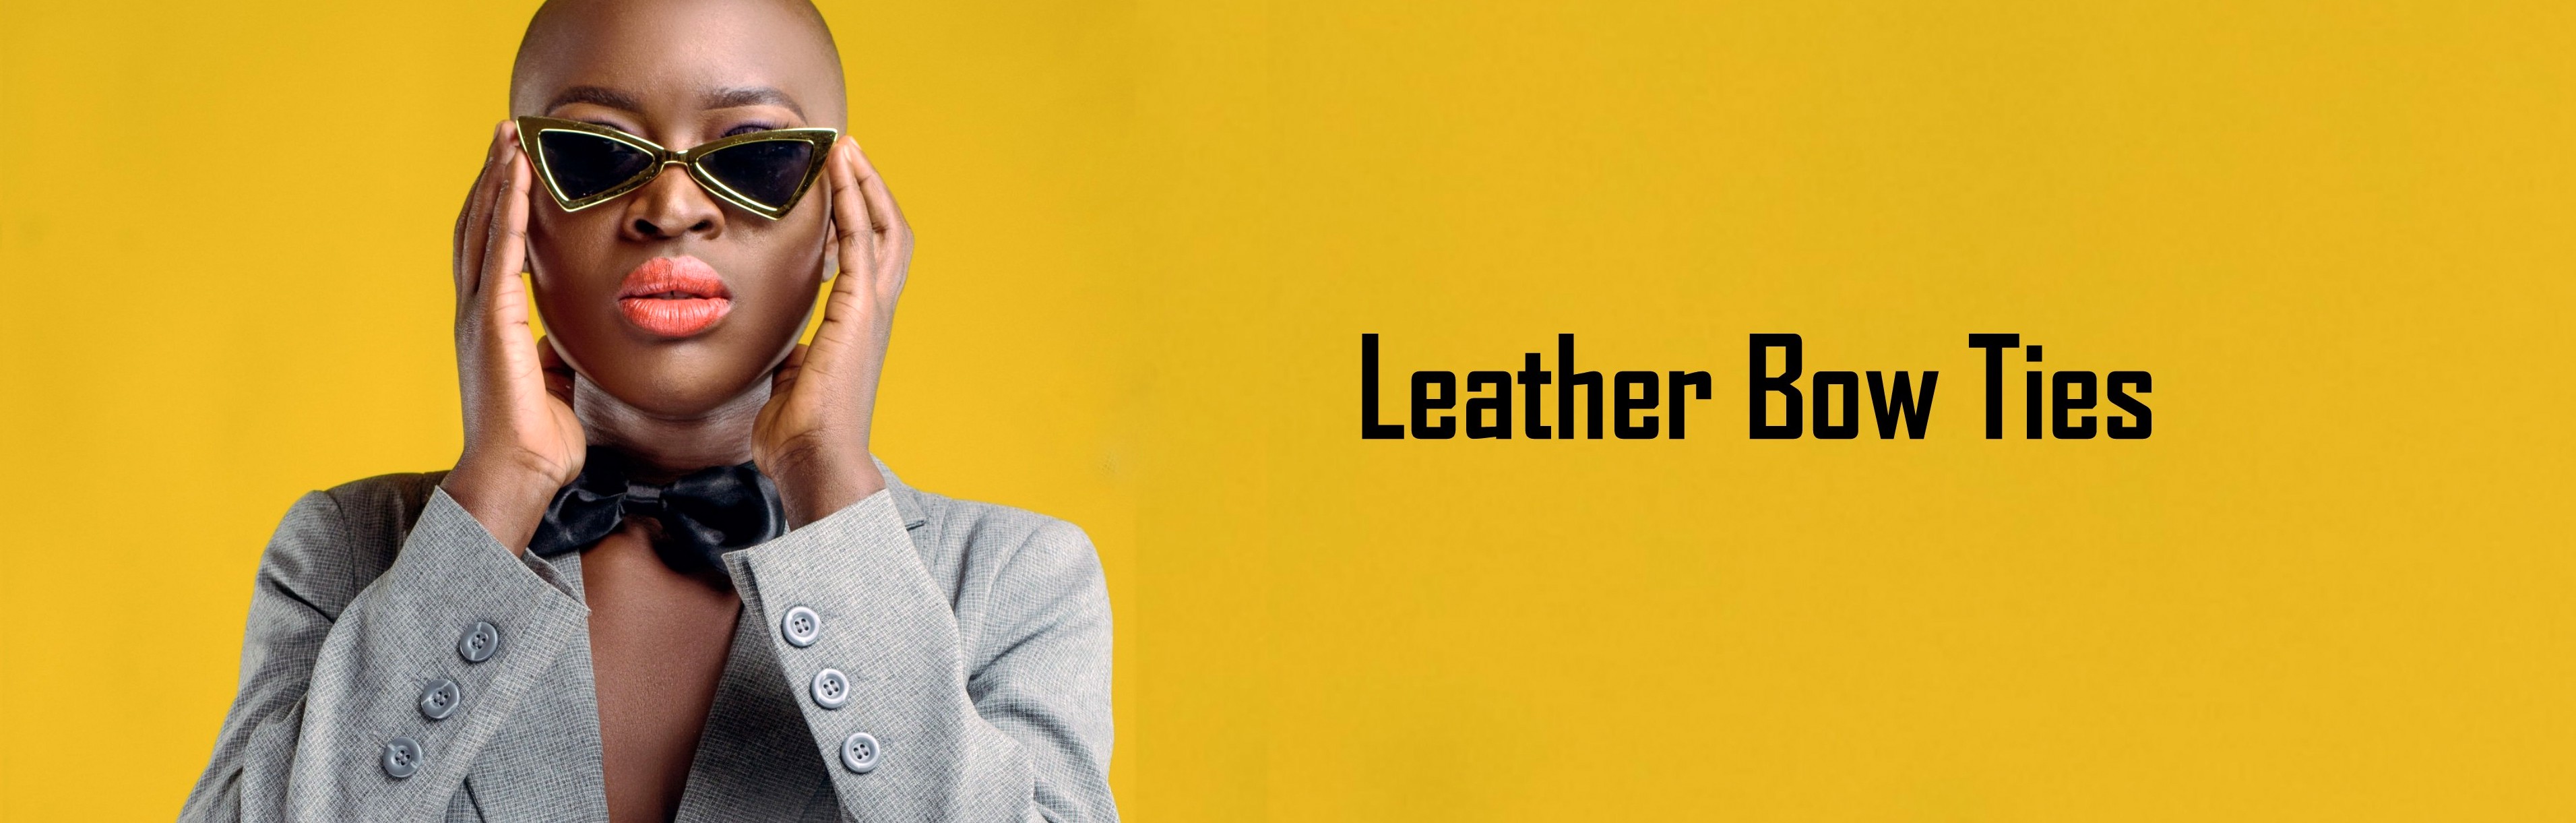 leather-bow-tie-banner.jpg